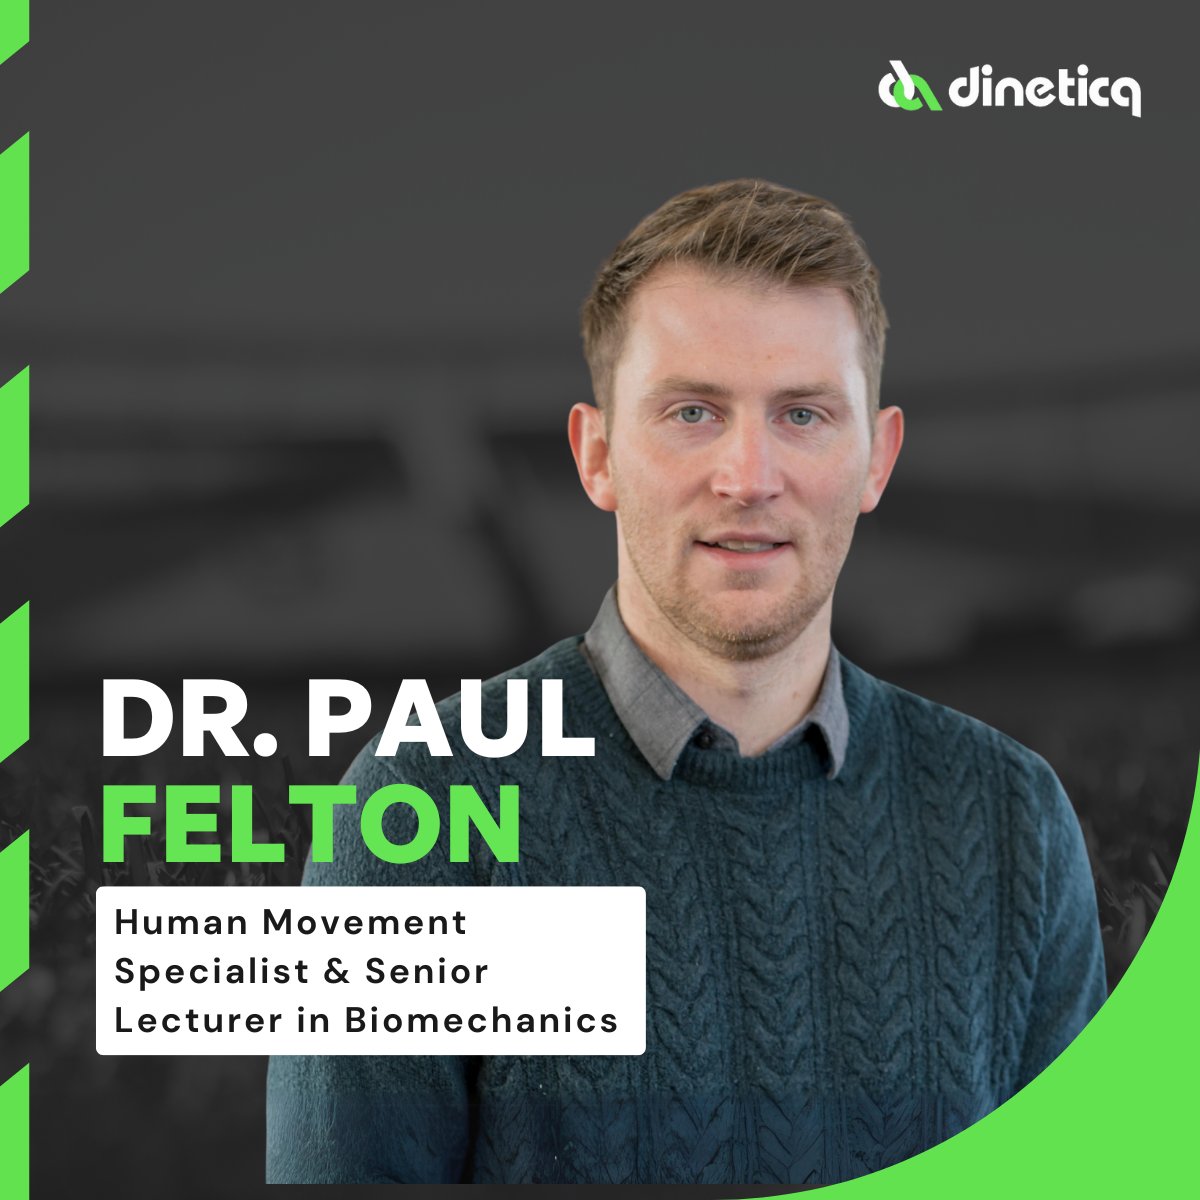 Introducing Dr. Paul Felton, Movement Specialist and Senior Biomechanics Lecturer. With a focus on cricket's technique aspects, Paul's research and expertise are unparalleled. He's pioneering predictive simulation models to optimise sporting performance globally.